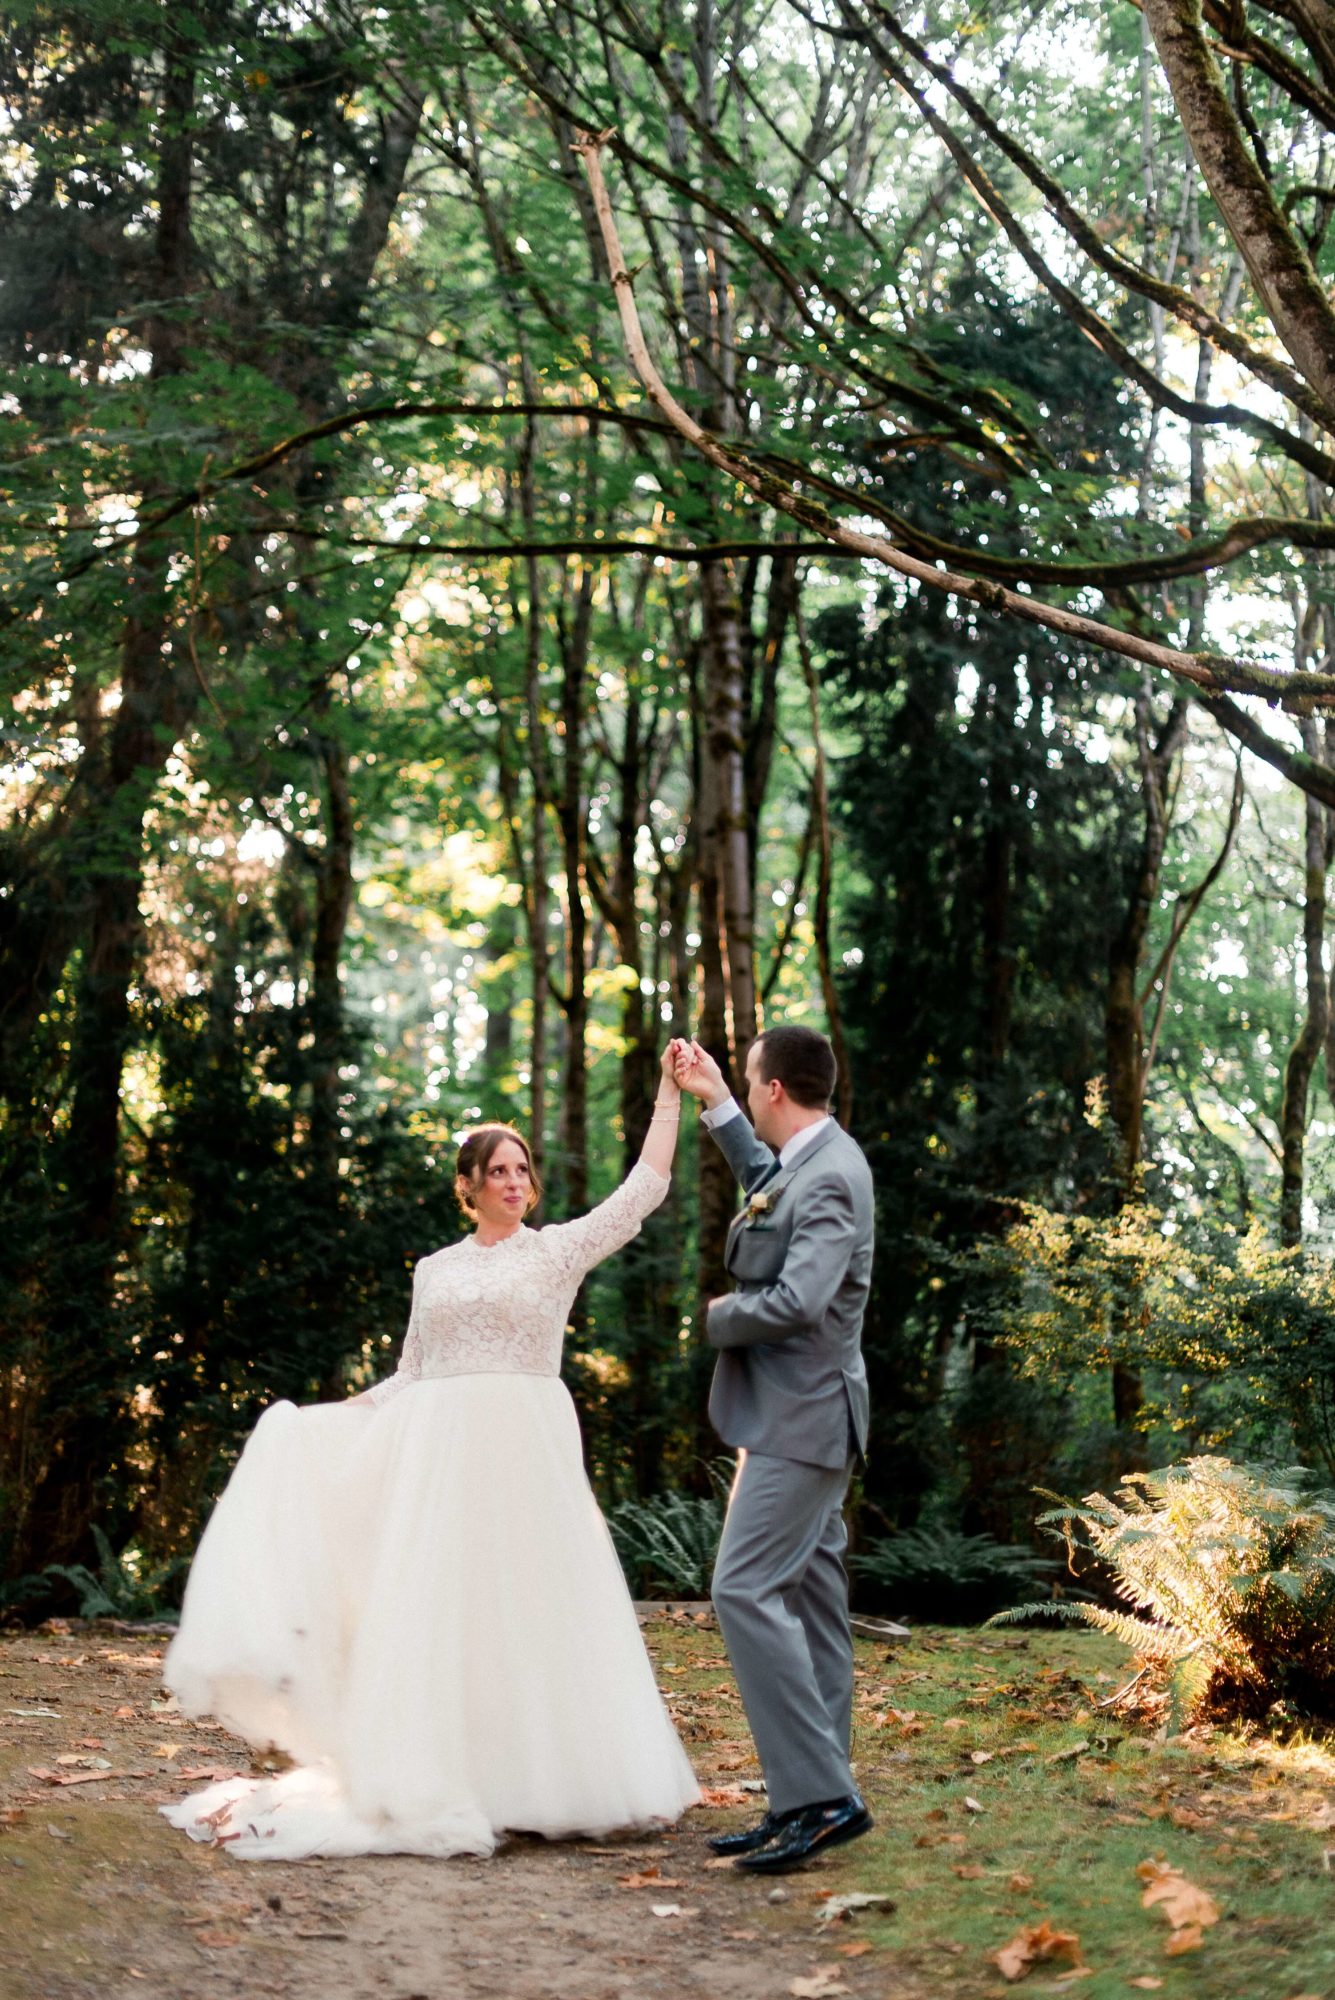 Bride and grom dance in a forest path